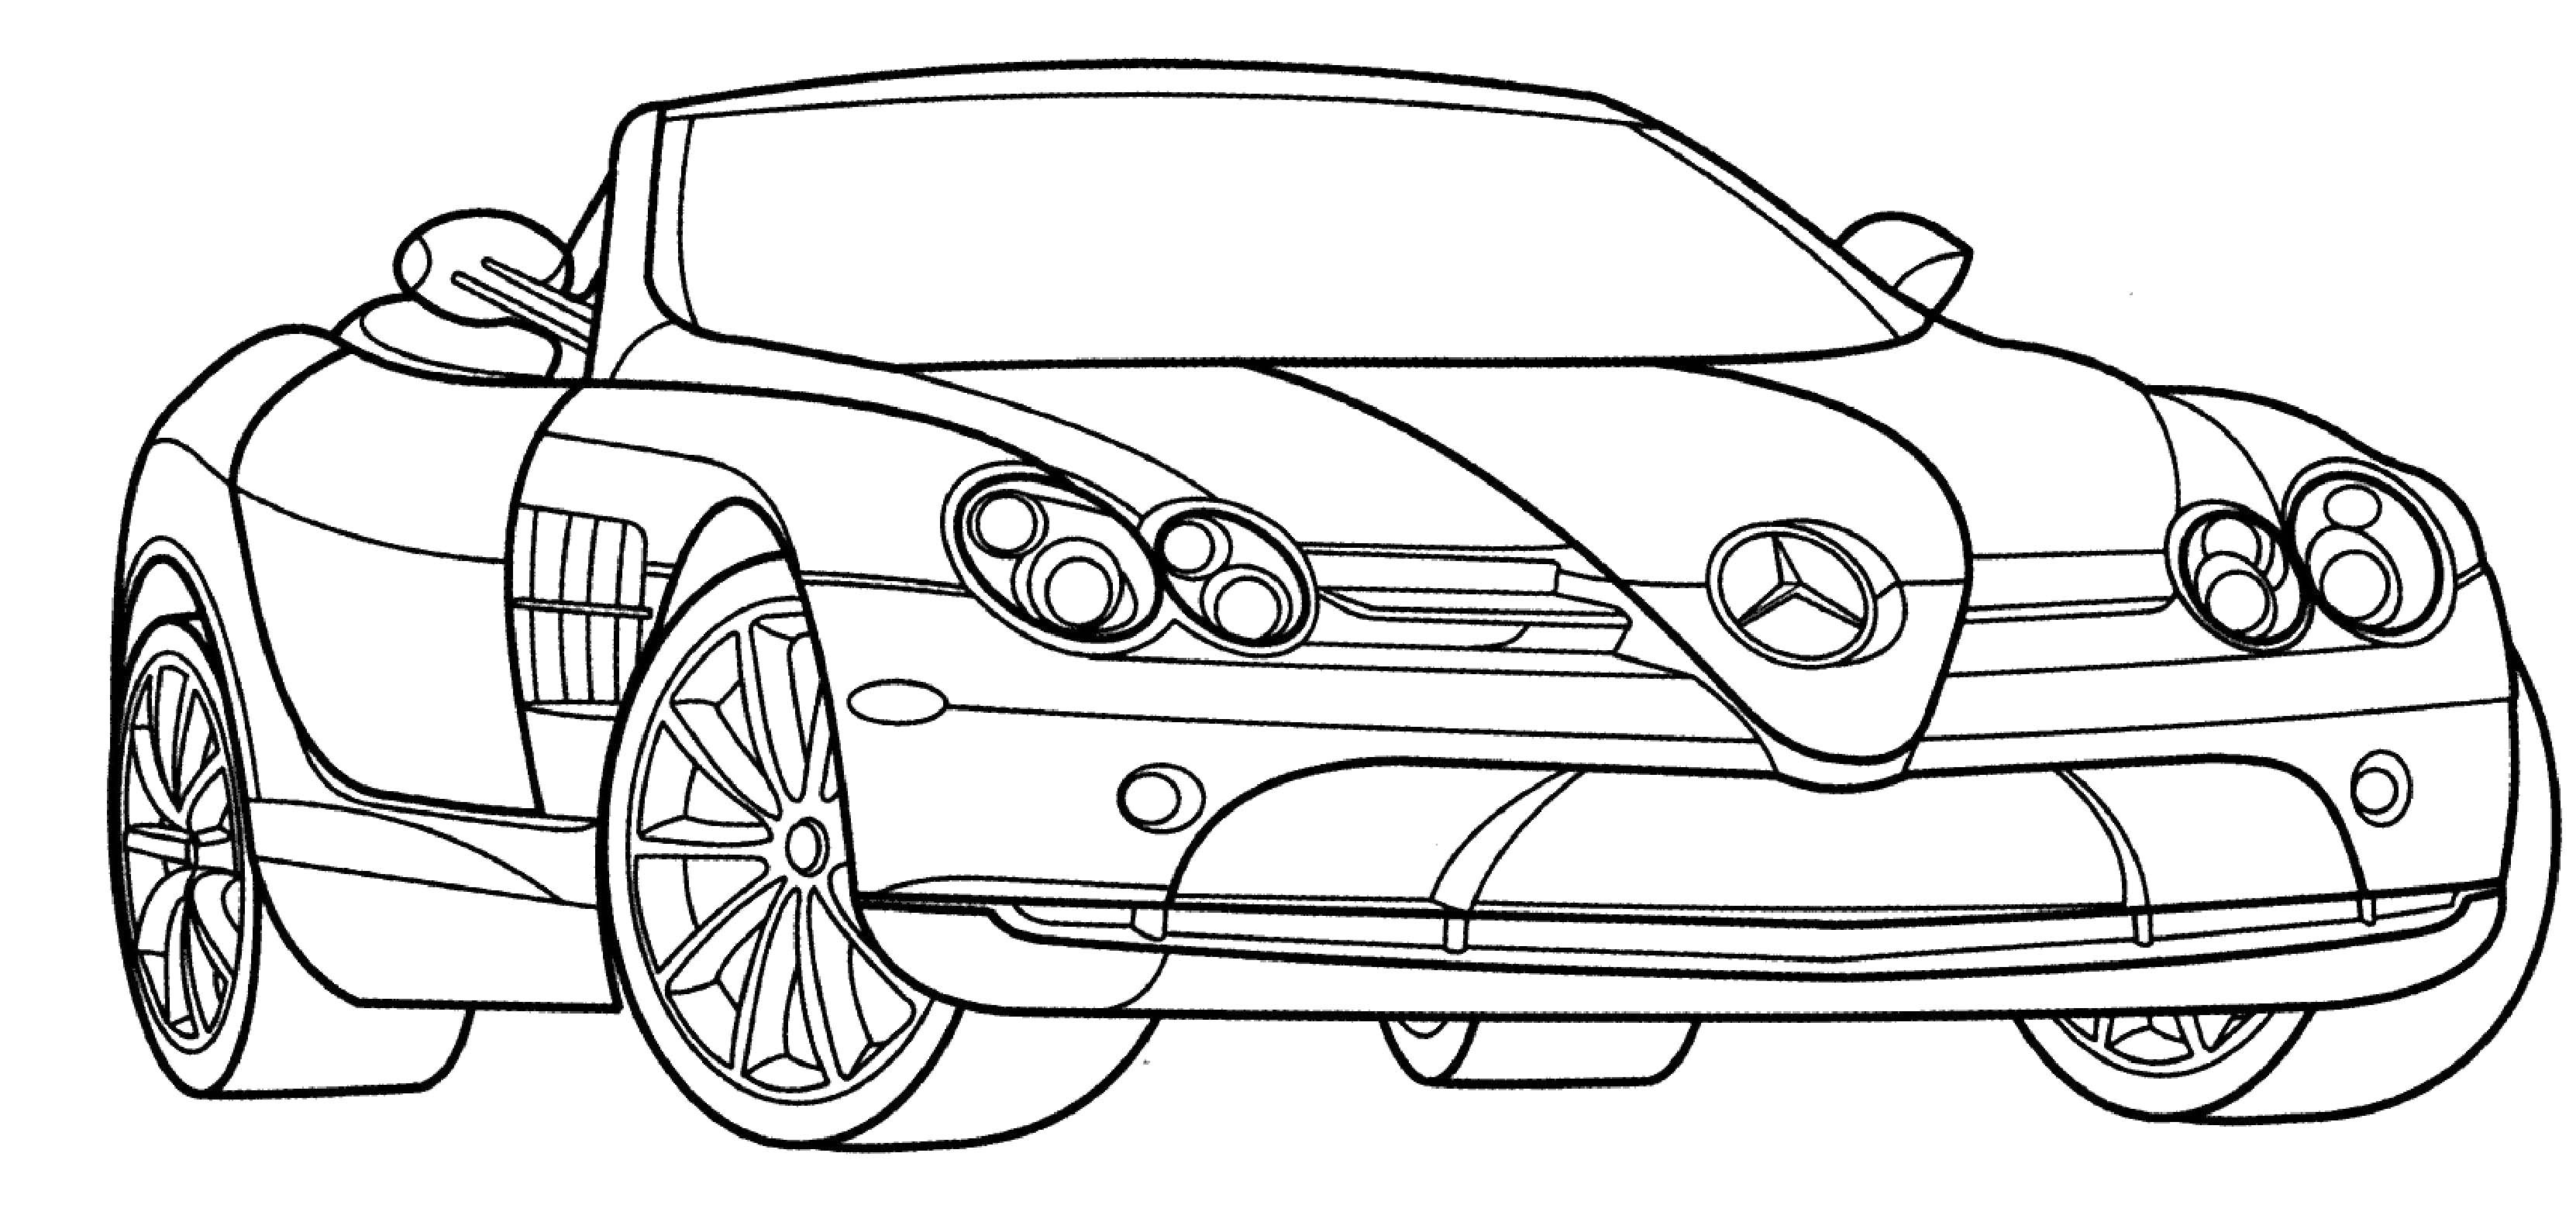 Car Coloring Sheets For Boys
 Sports Cars Coloring Pages For Boys – Color Bros